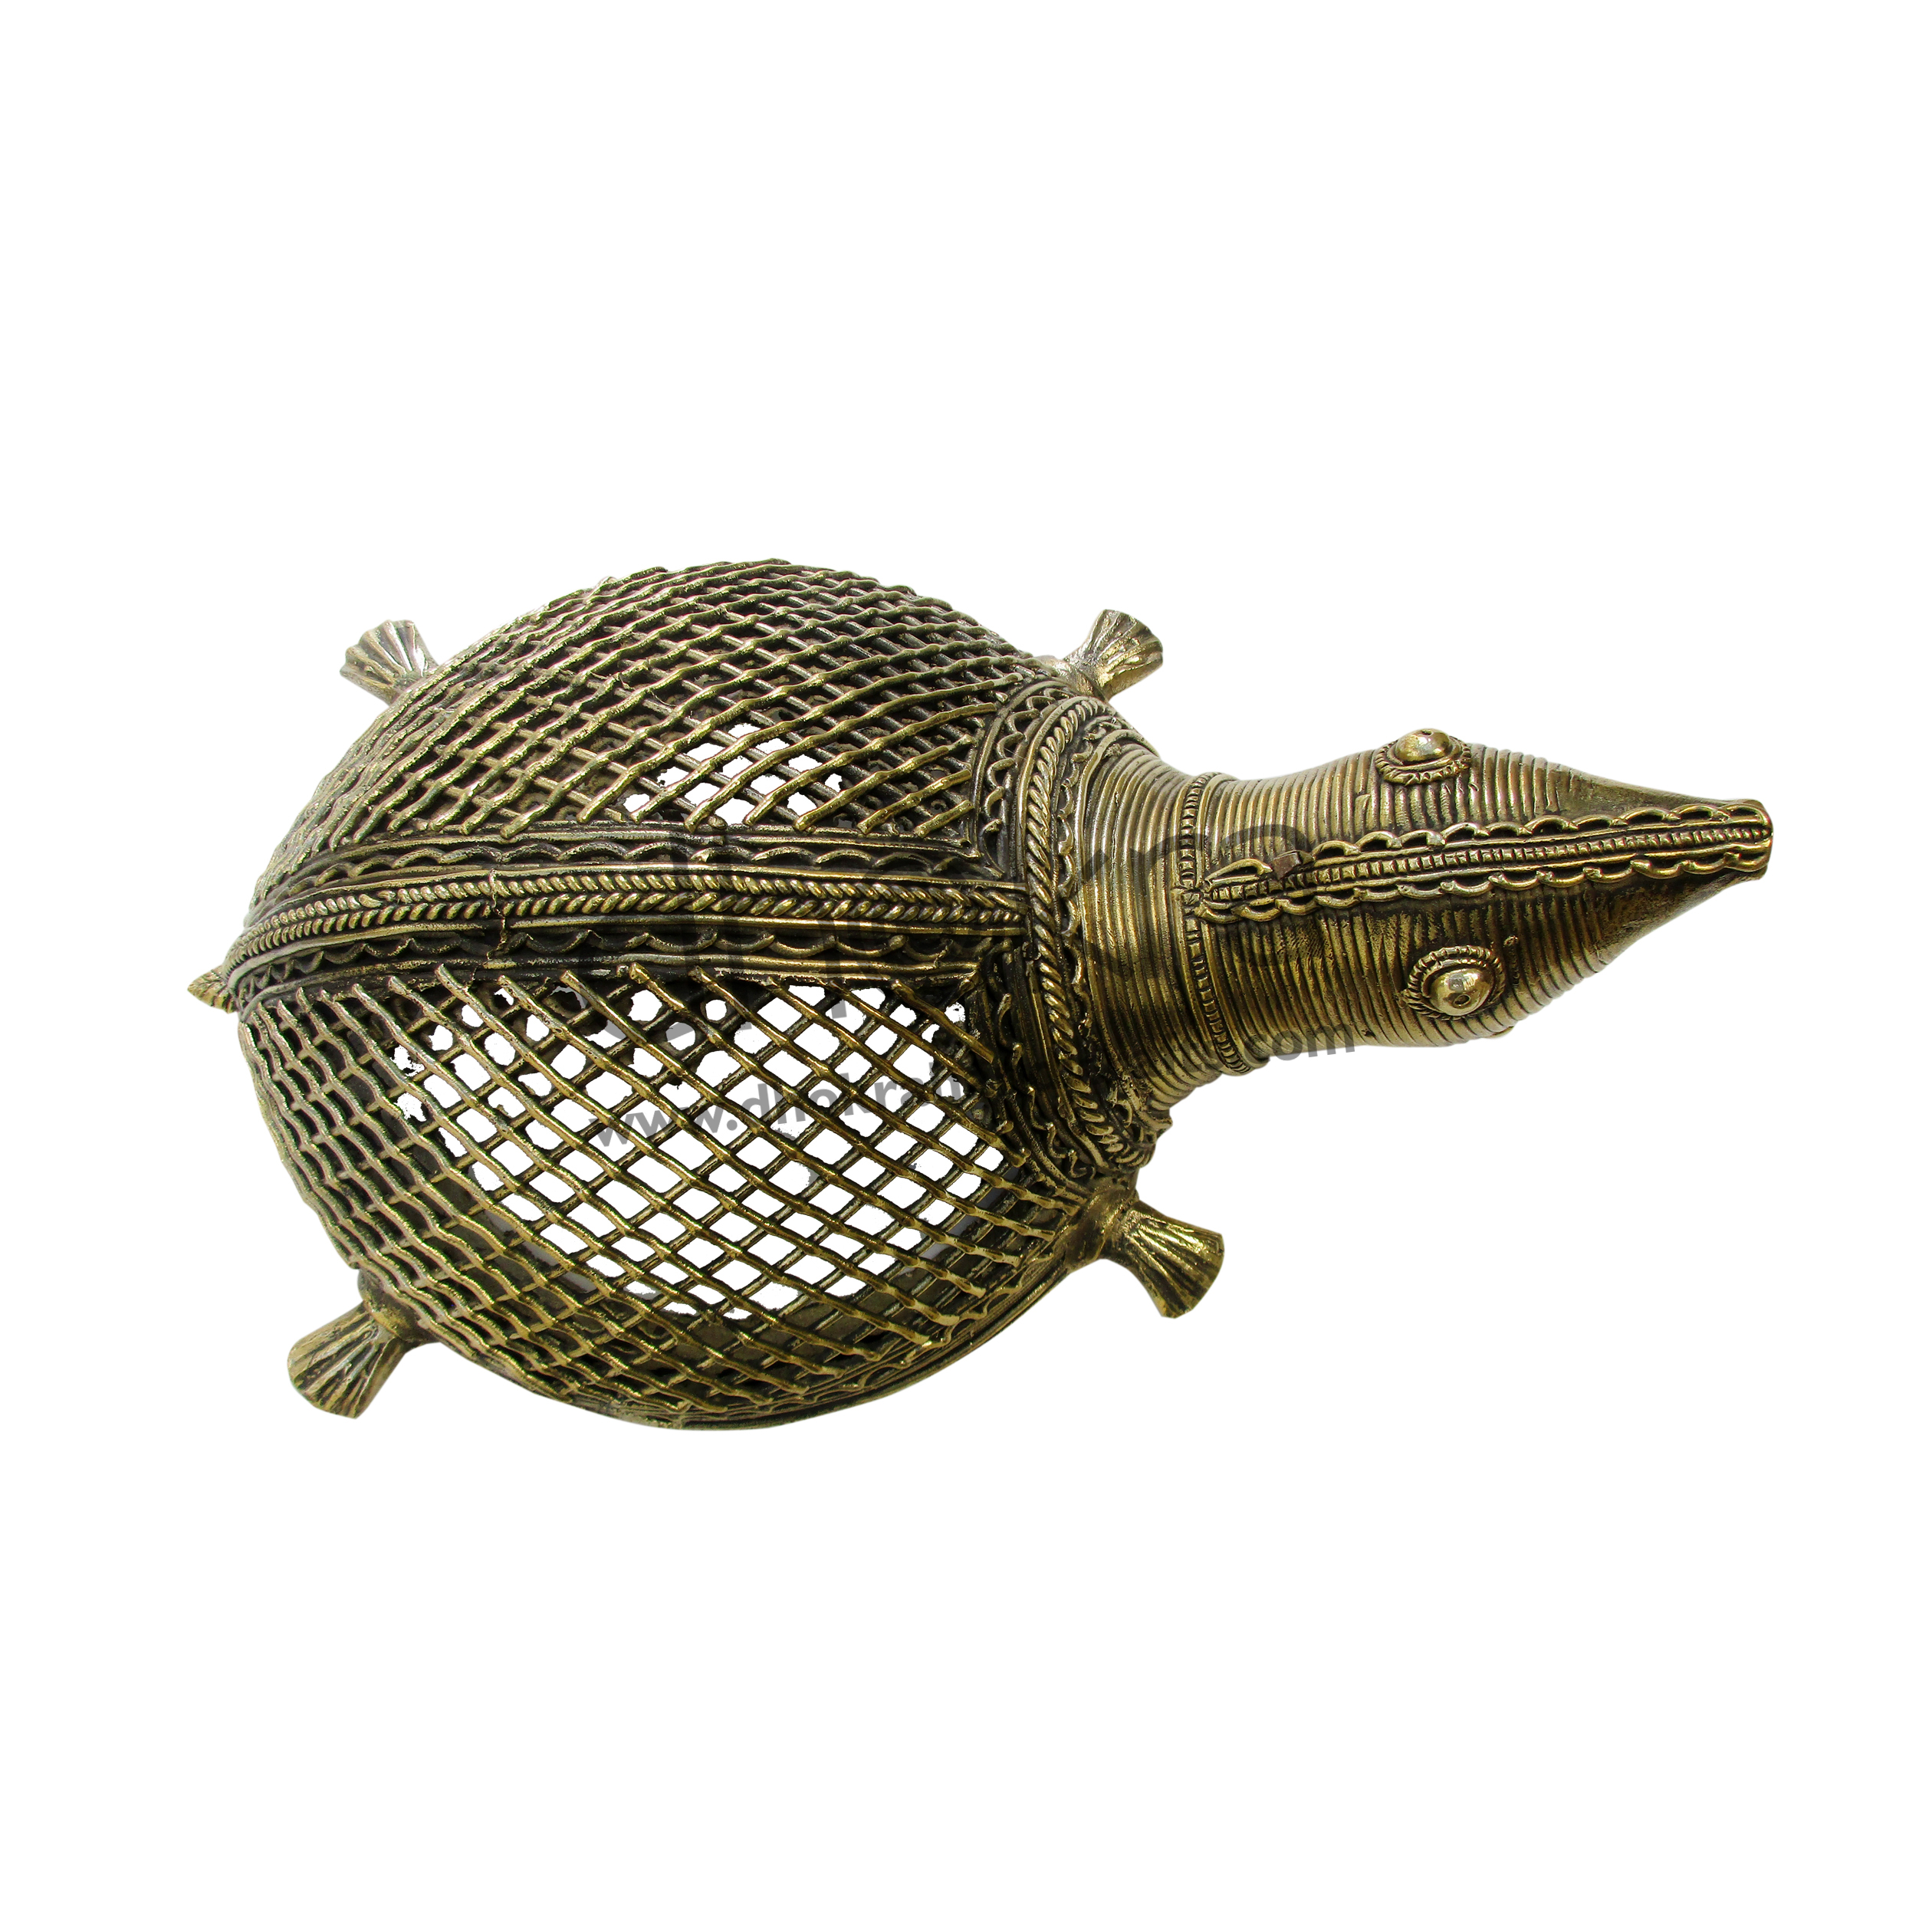 Dhokra Turtle in Jaali Work | home decor products | Dhokra